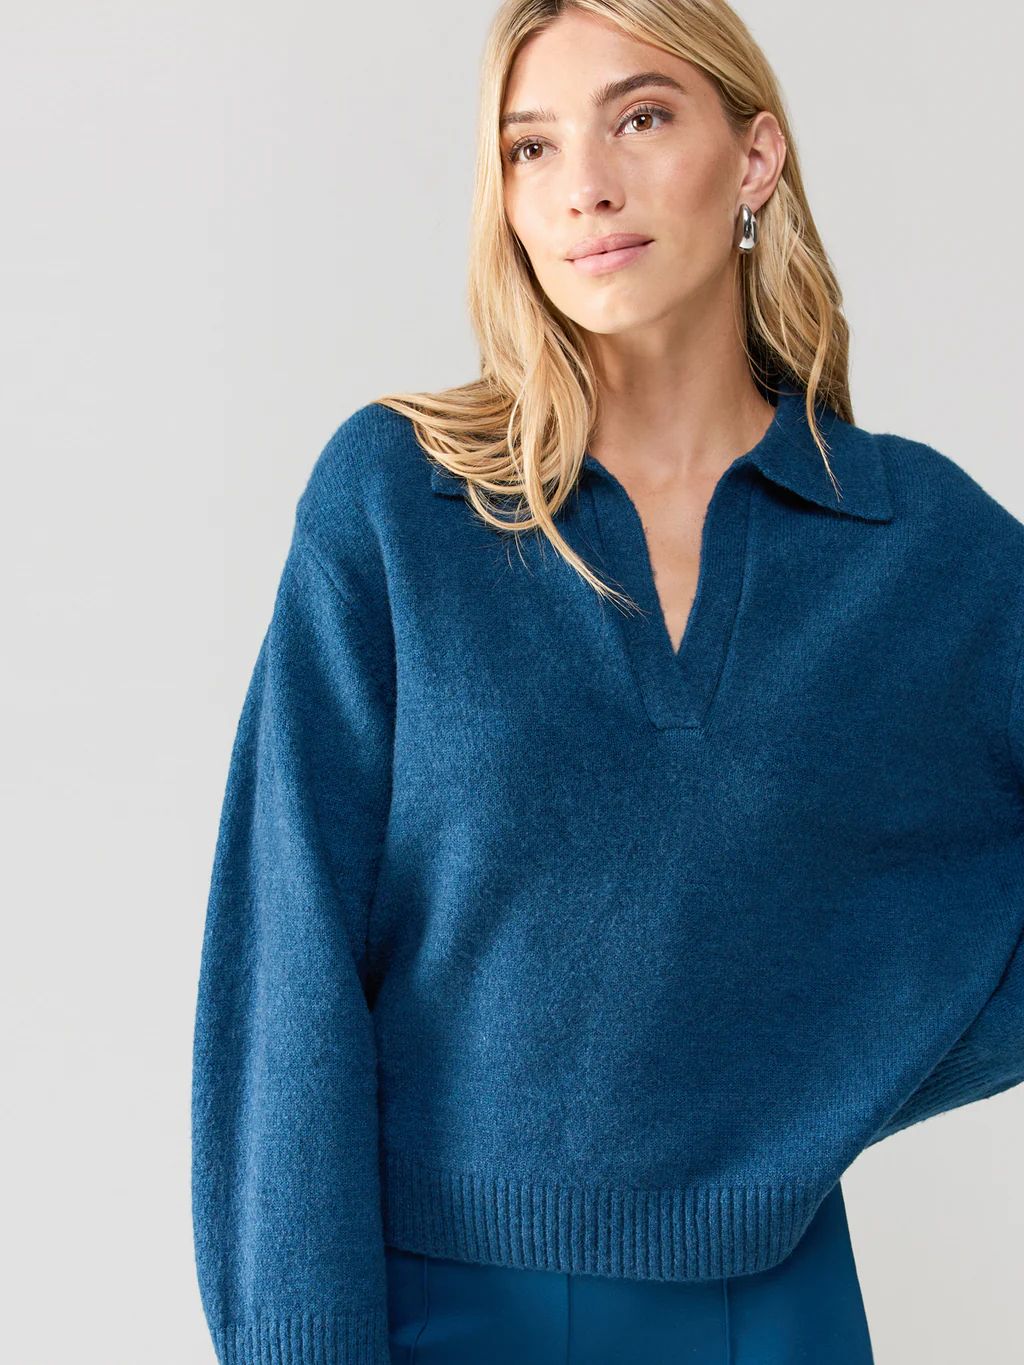 Johnny Collared Sweater Blue Jewel | Sanctuary Clothing